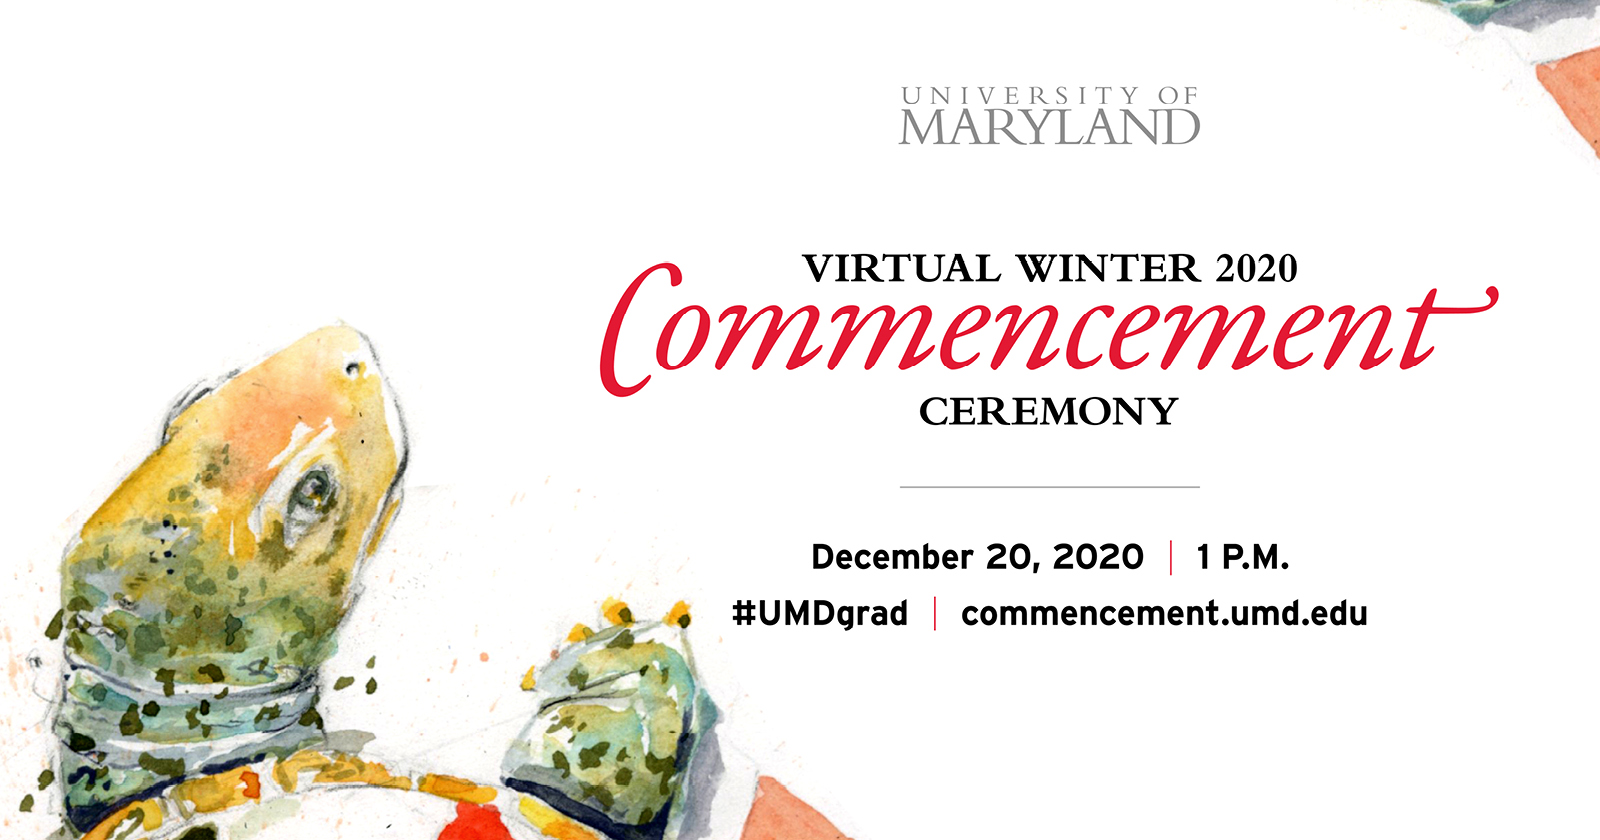  Testudo with text "University of Maryland Virtual Winter 2020 Commencement Ceremony. December 20, 2020 1p.m. #UMDgrad commencement.umd.edu